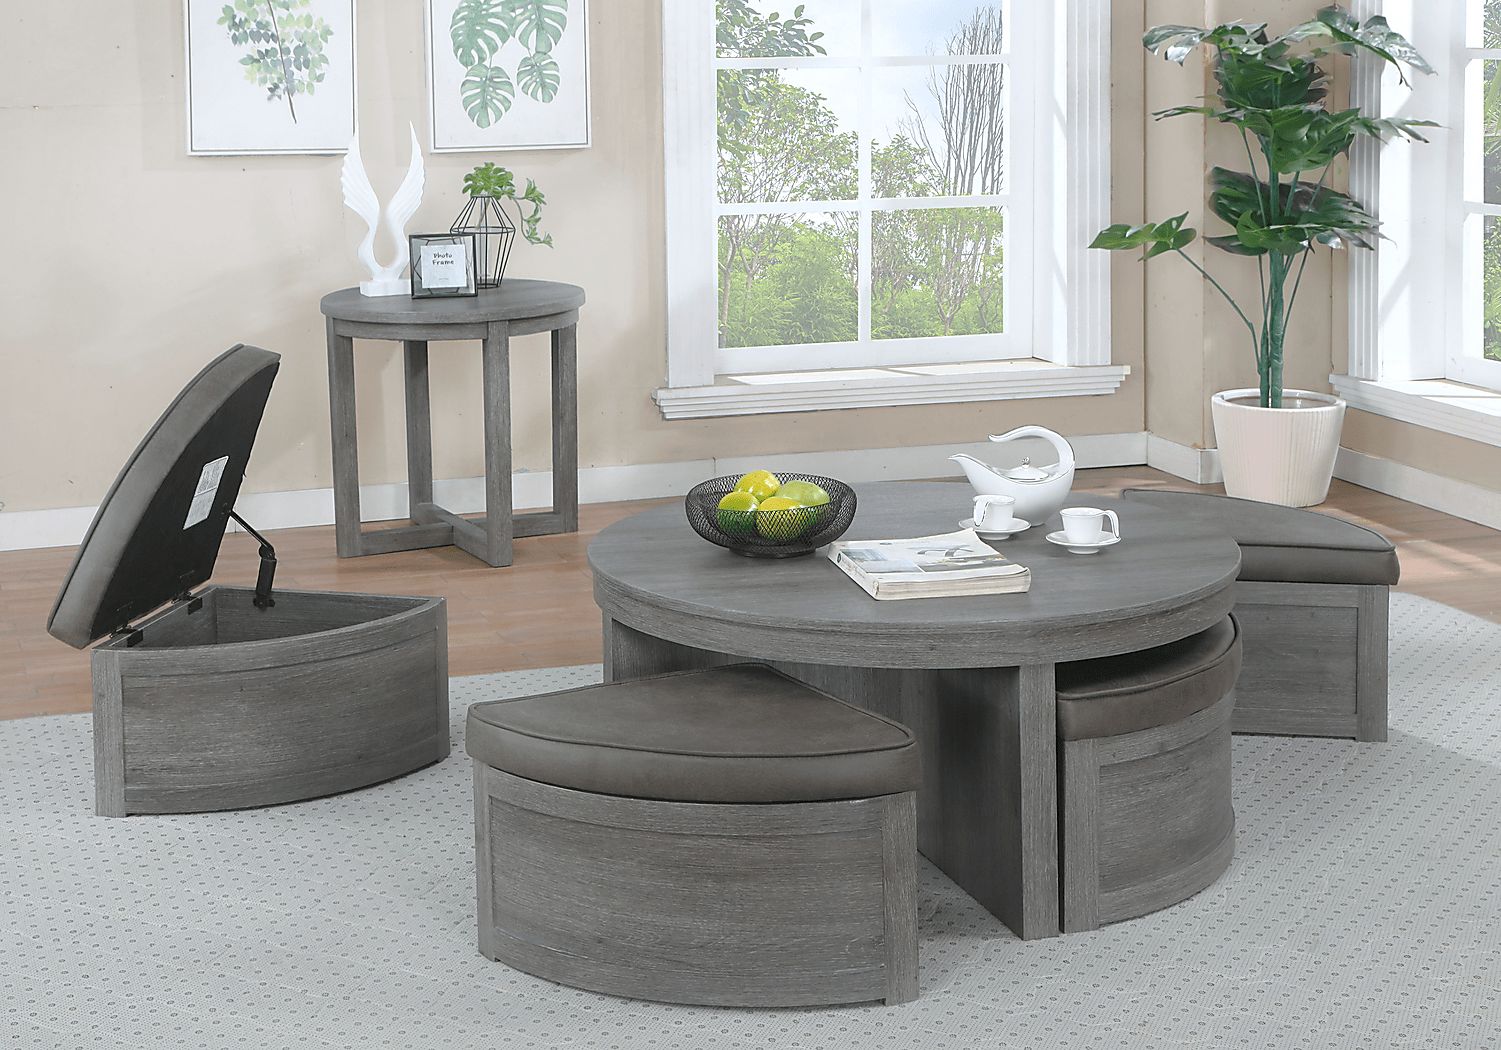 https://assets.roomstogo.com/product/darien-gray-3-pc-table-set-with-storage-ottomans_2201997P_image-item?cache-id=f7565c12f124d2461d3f6f5a79a062eb,